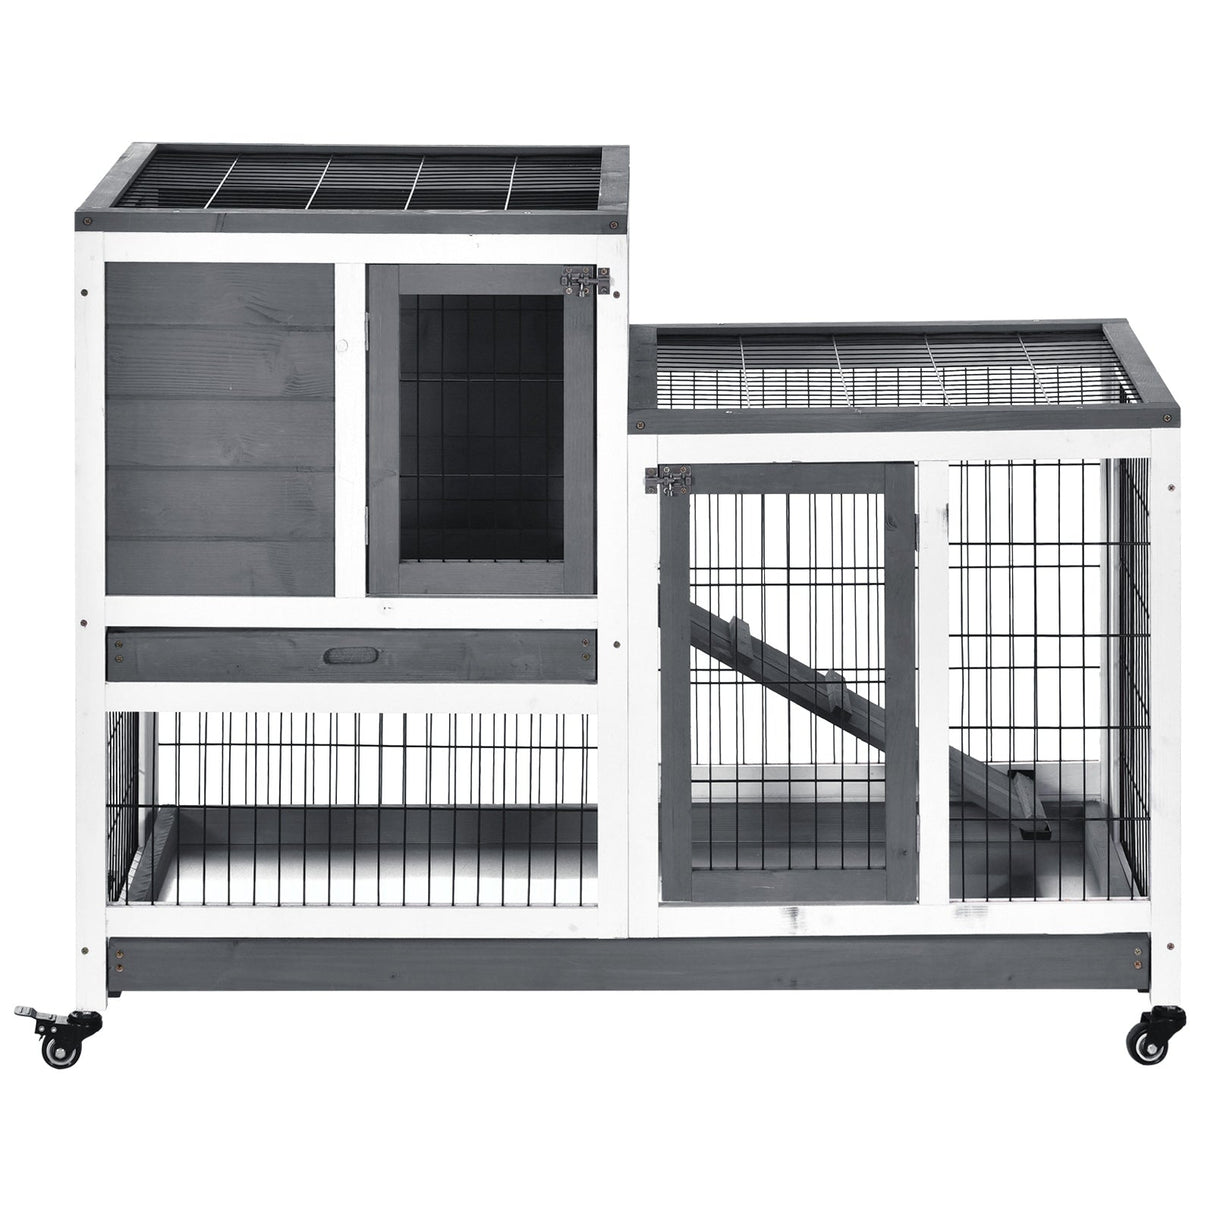 Wooden Indoor Rabbit Hutch Guinea Pig House Bunny Small Animal Cage W/ Wheels Enclosed Run 110 x 50 x 86 cm, PawHut, Grey